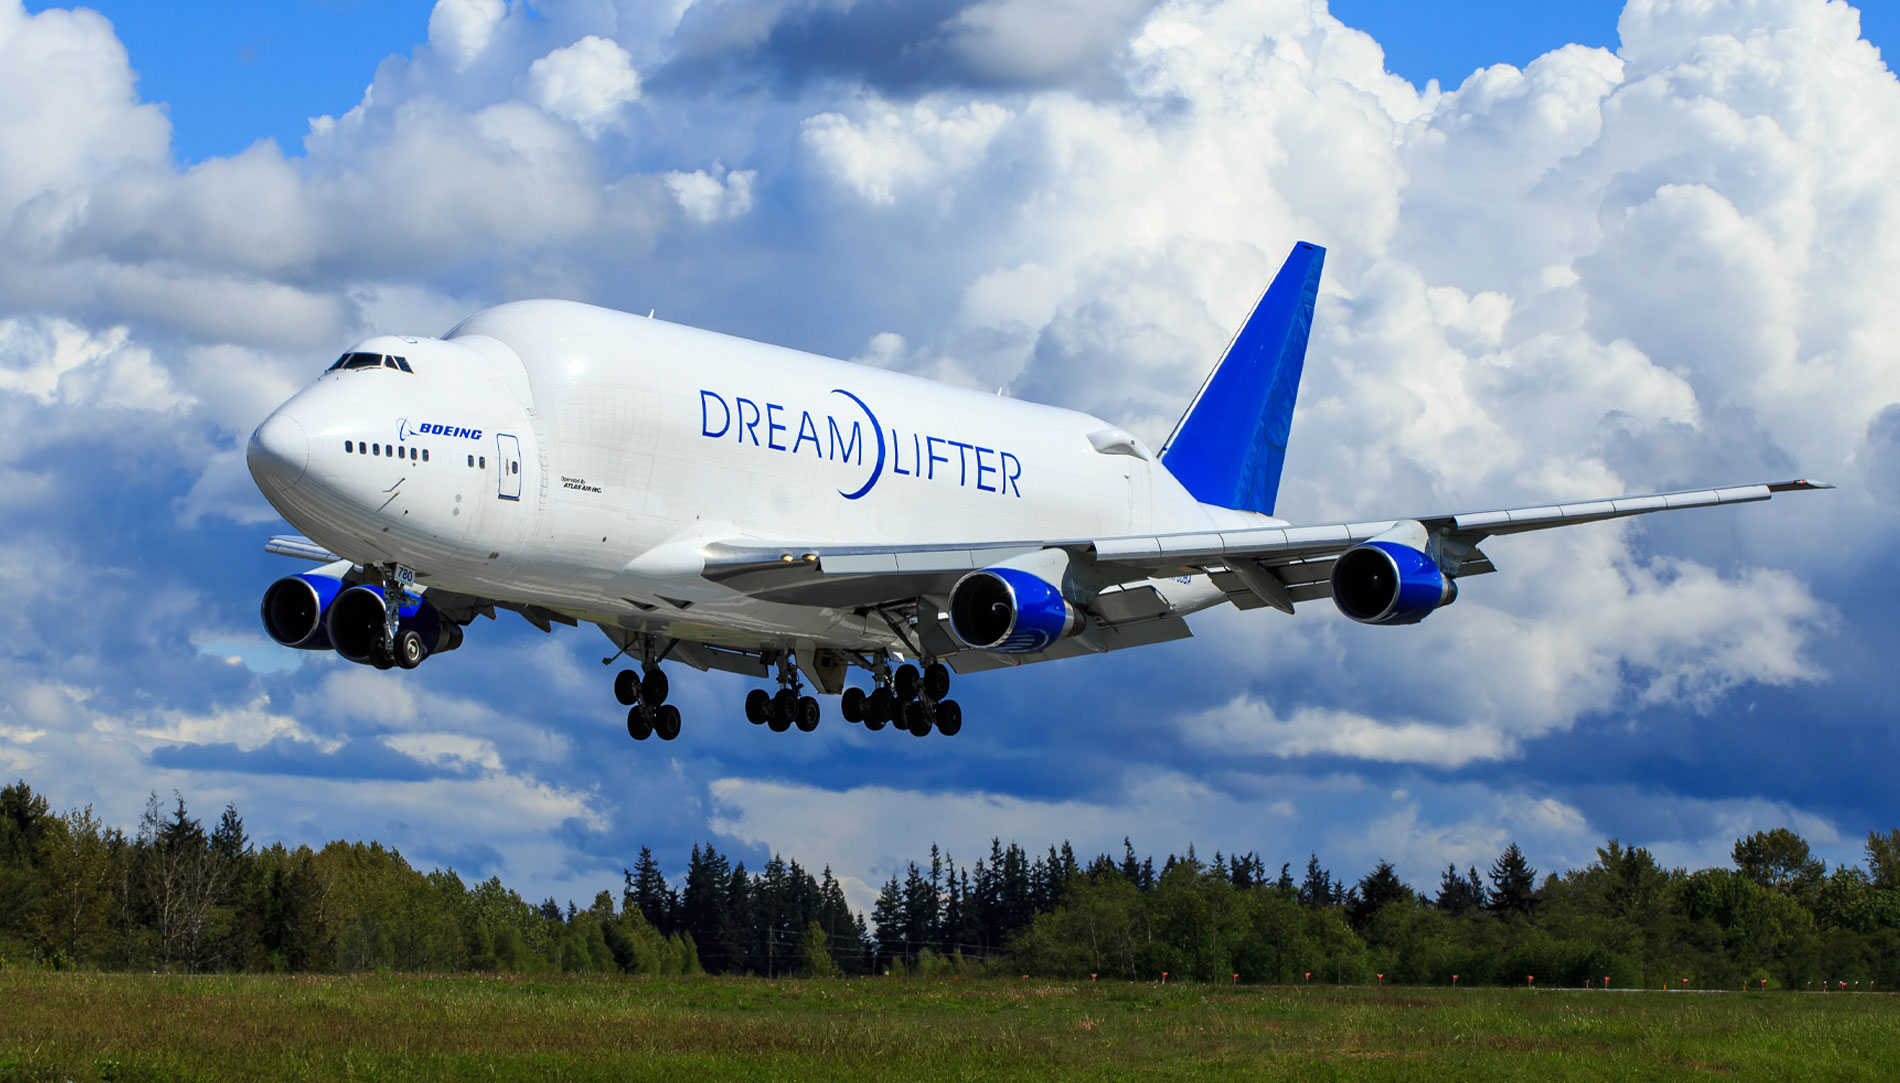 A Boeing 747 Dreamlifter at Paine Field in Snohomish County